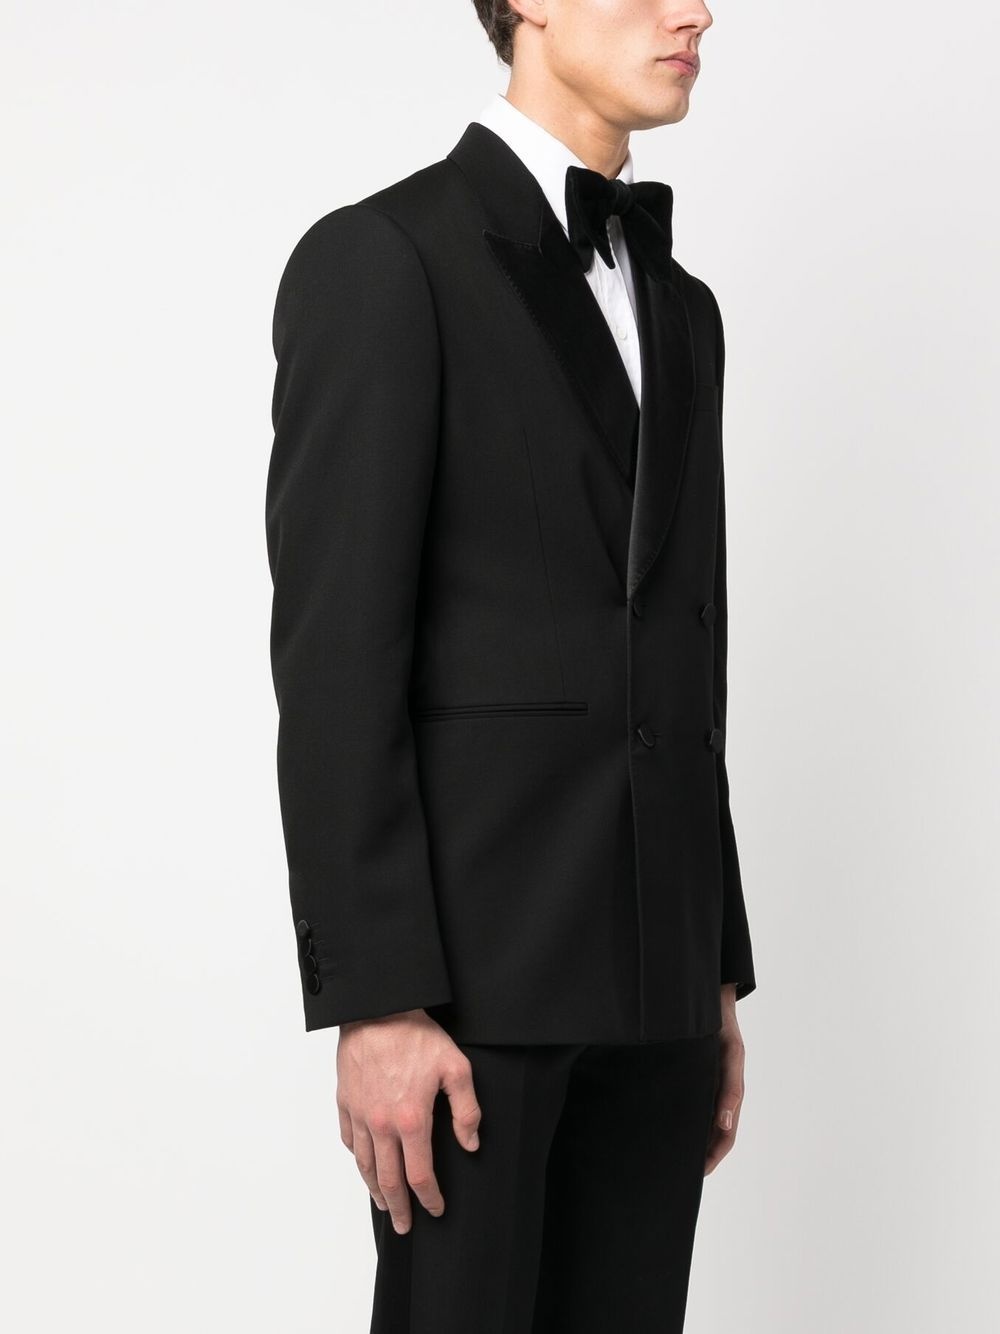 double-breasted wool dinner jacket - 3